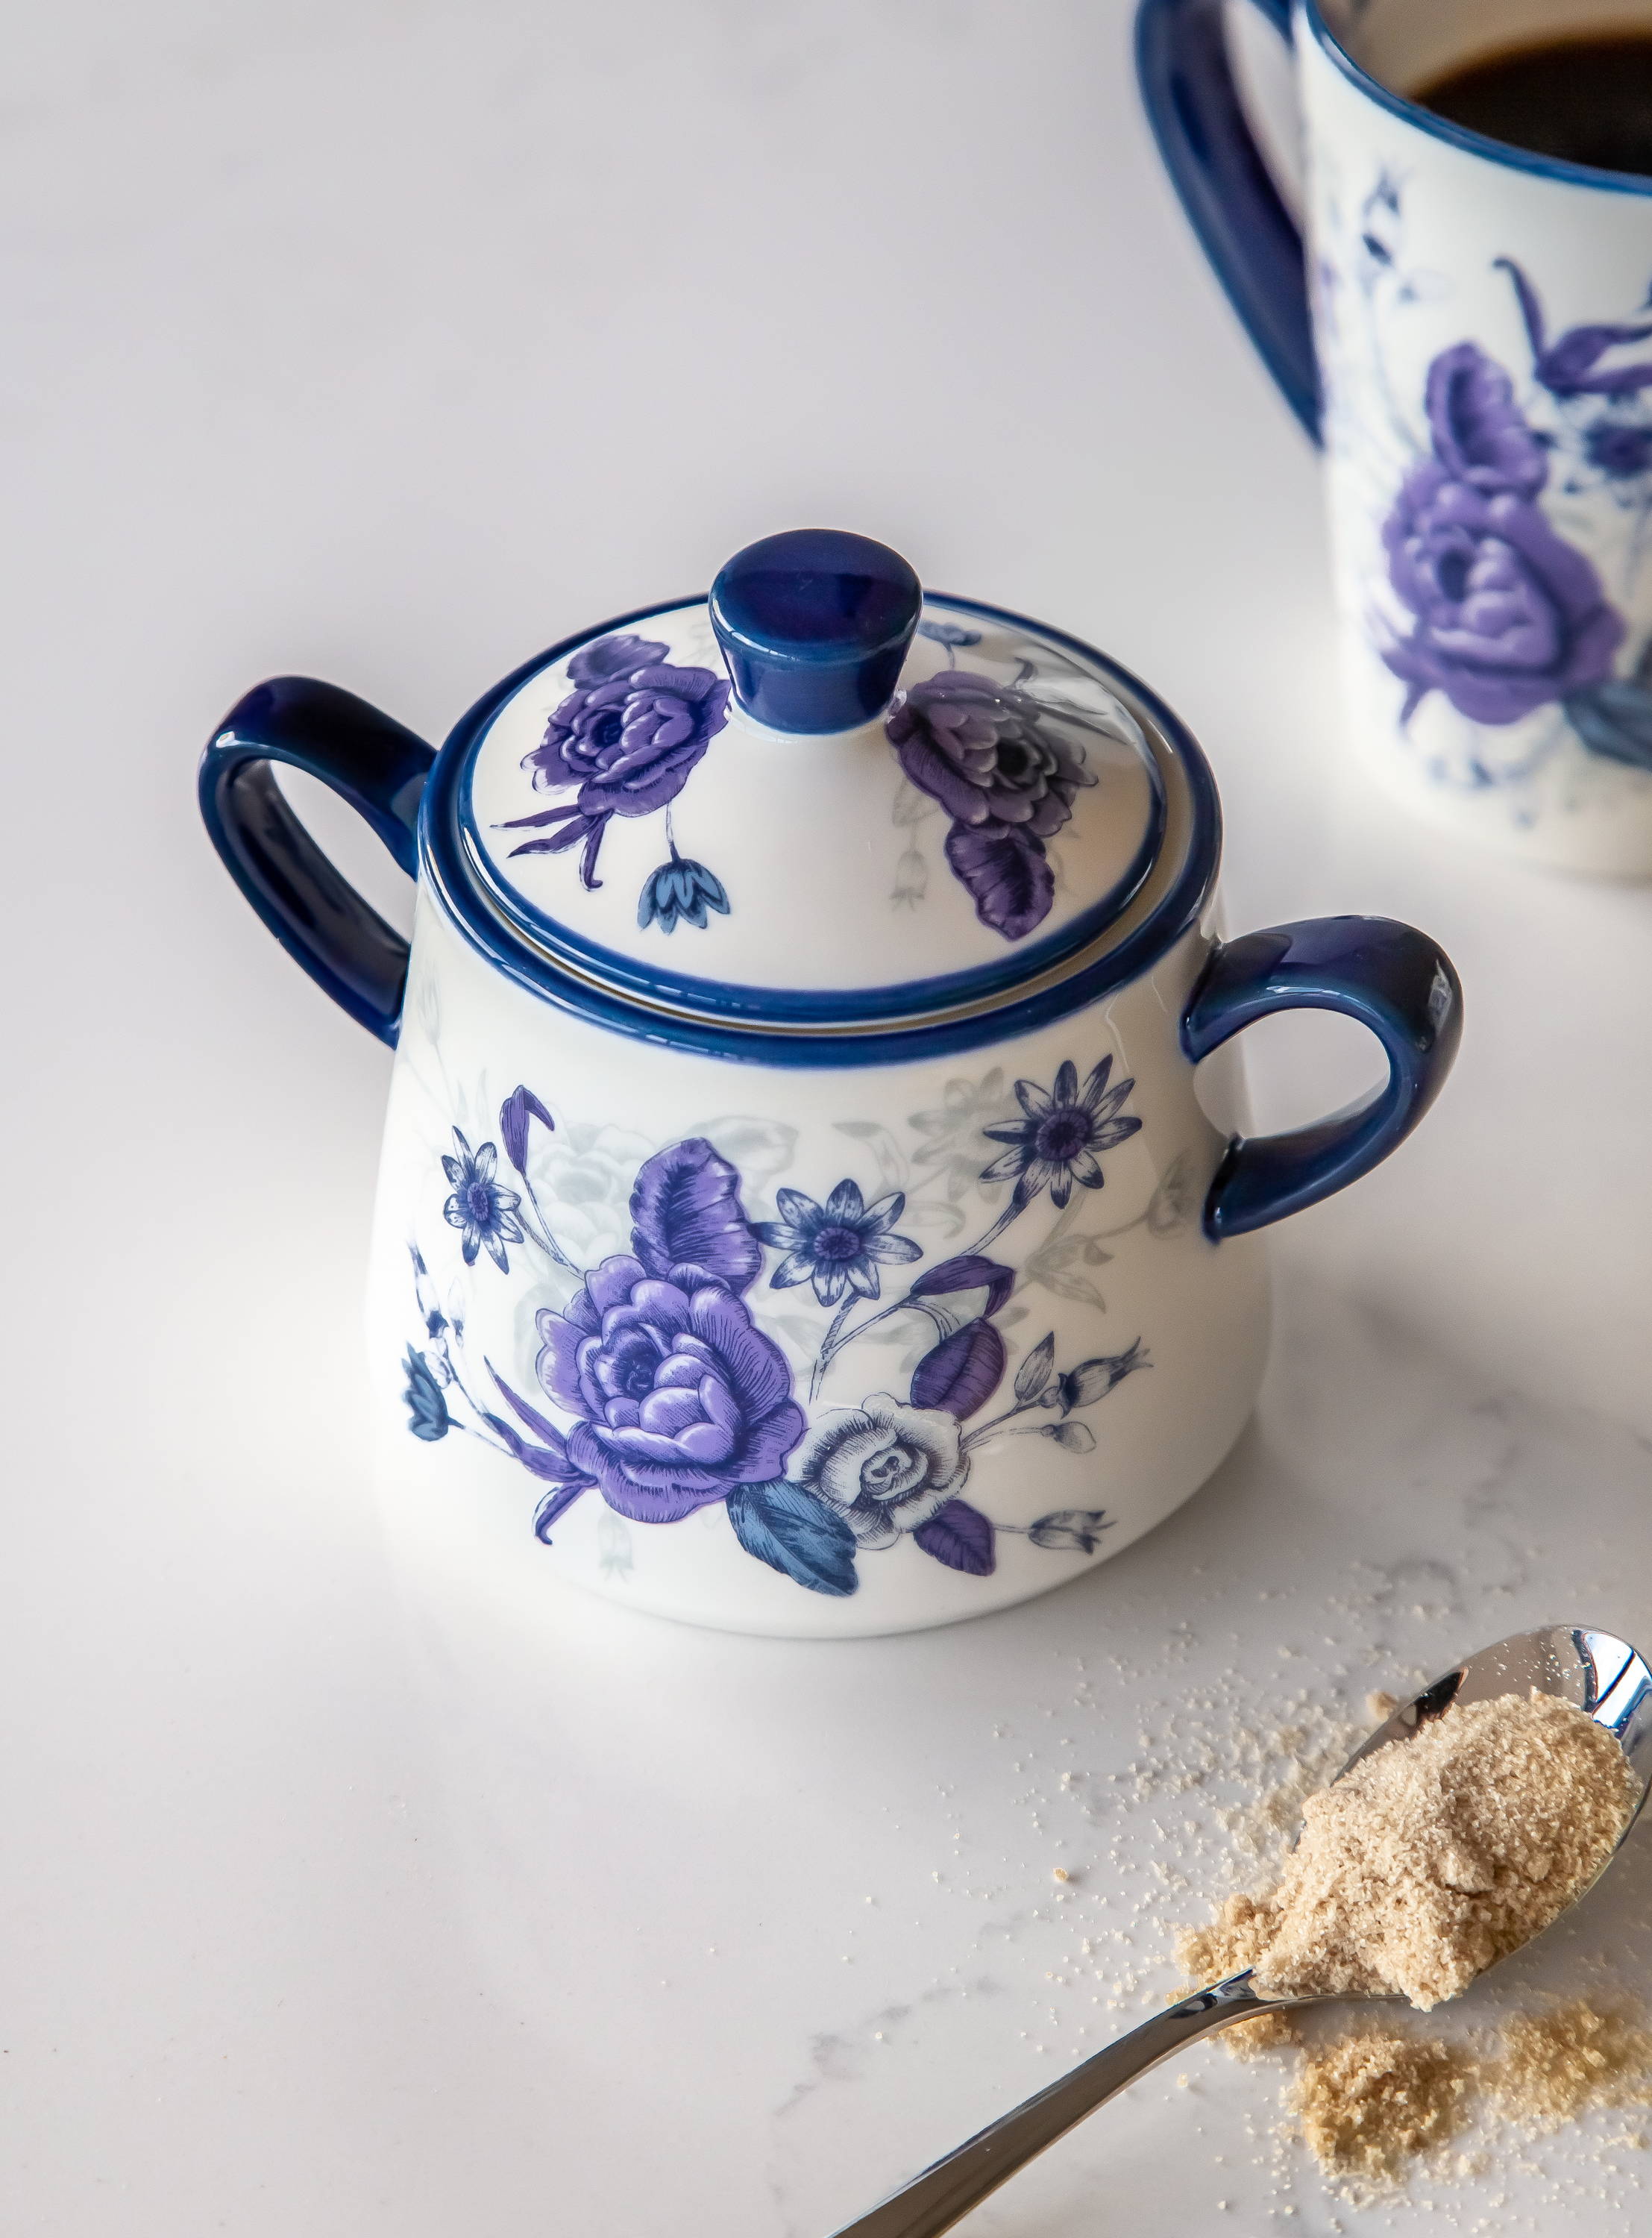 A blue floral sugar bowl with the lid on. There is a teaspoon with brown sugar on next to it.